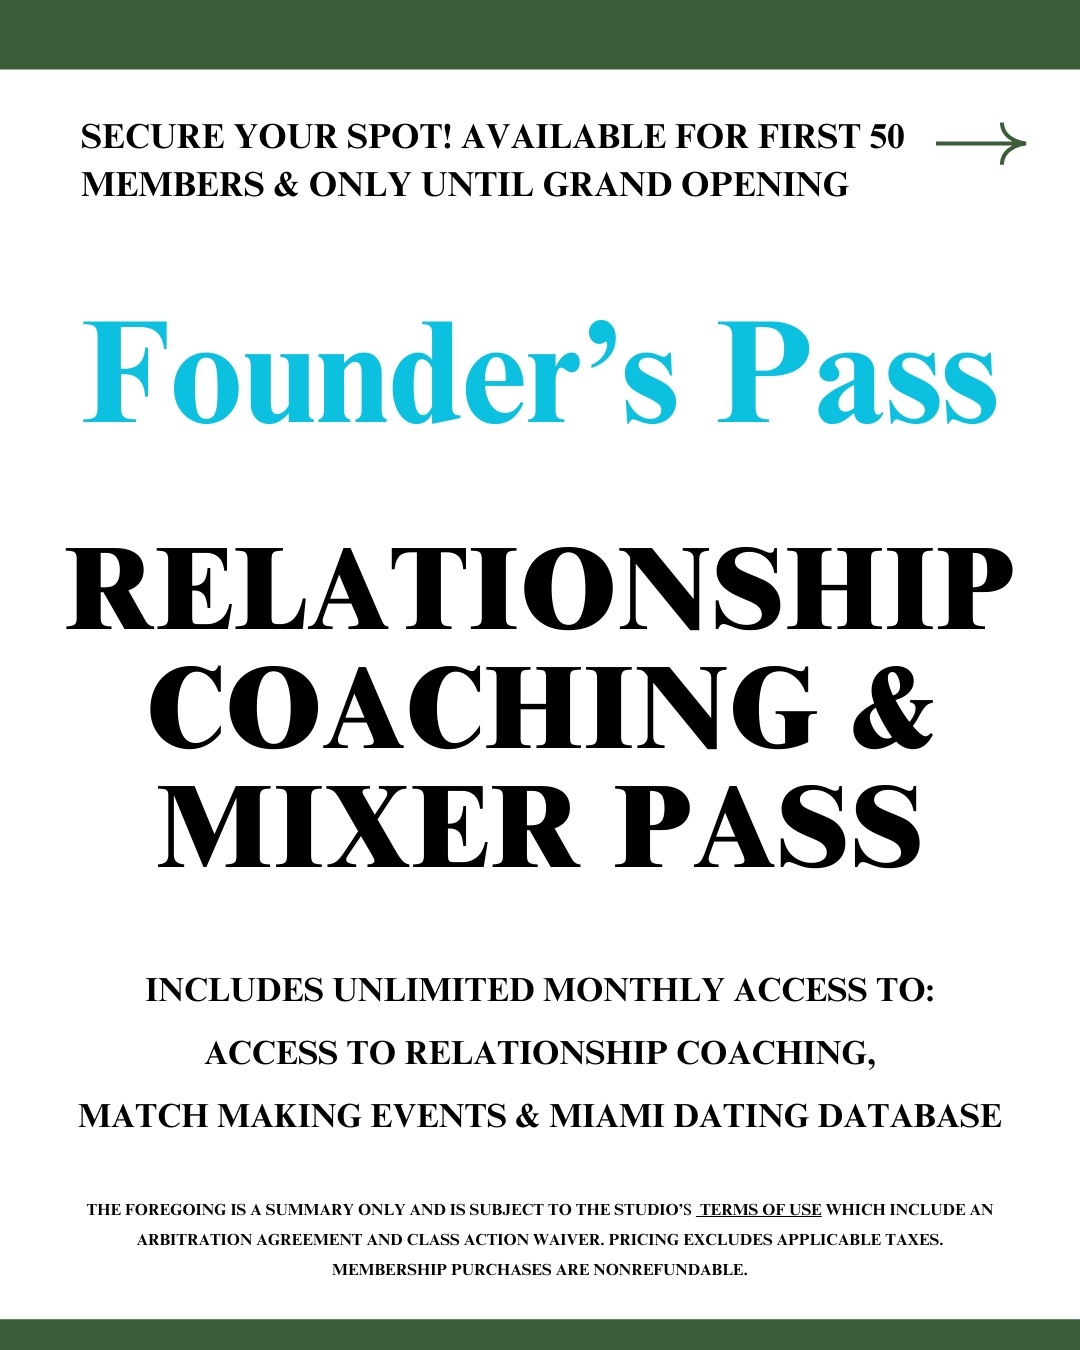  Monthly Relationship Coaching Mixers & Special Events Matchmaking Database 